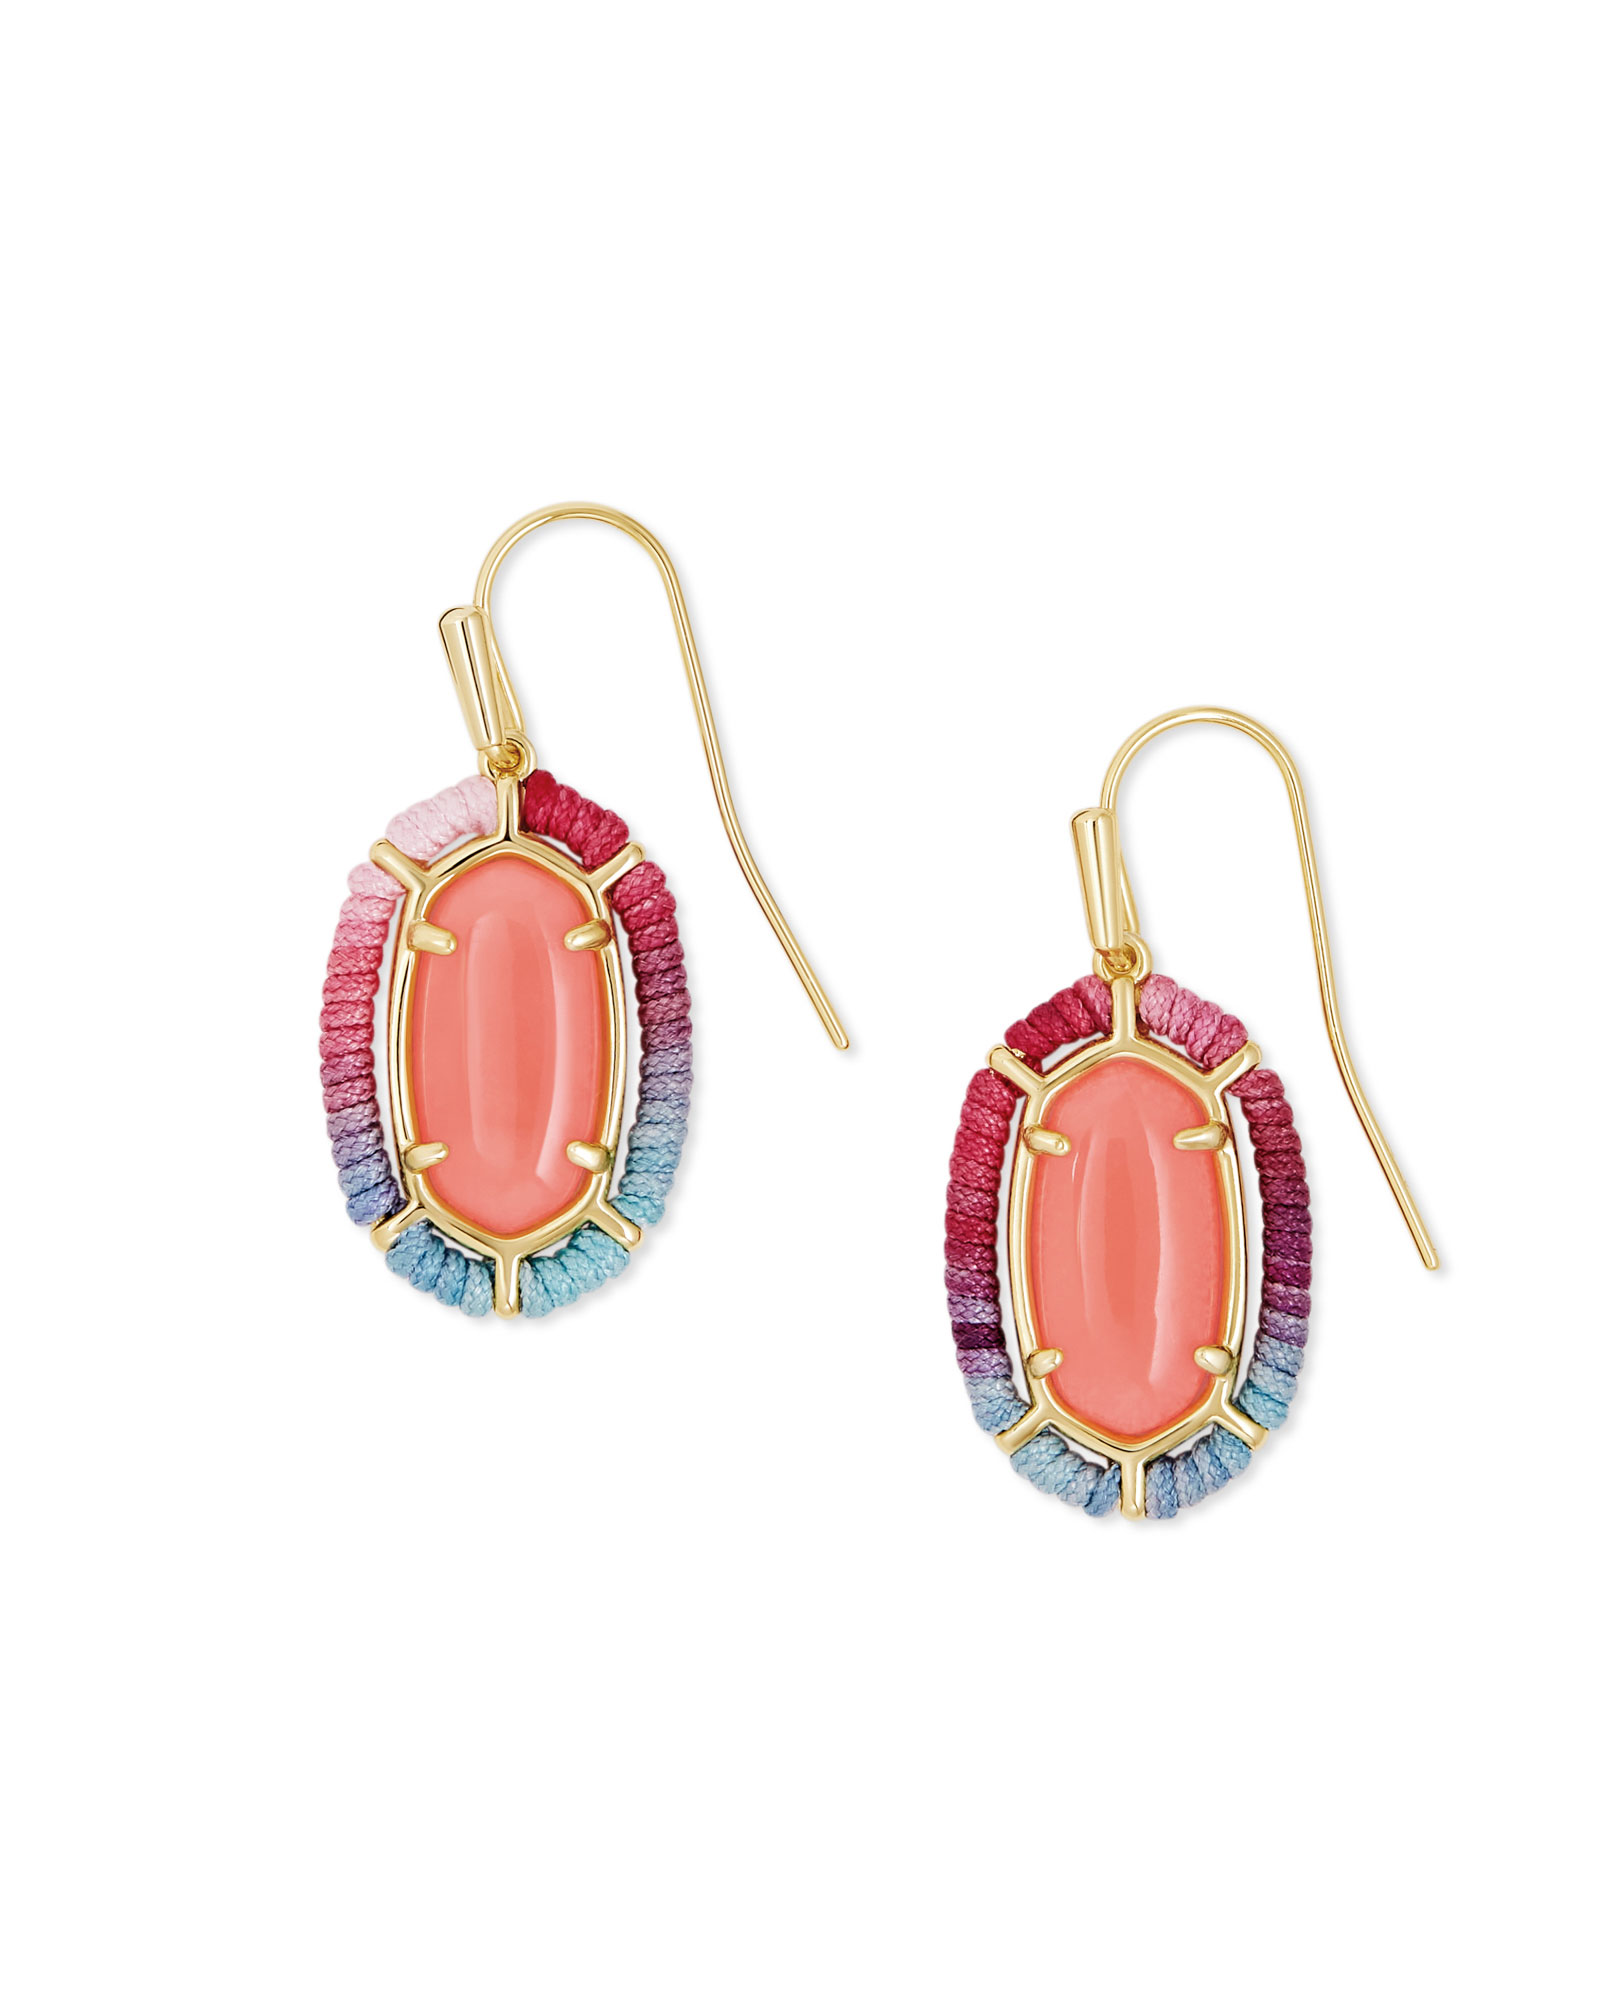 Threaded Lee Gold Drop Earrings in Coral Illusion | Kendra Scott